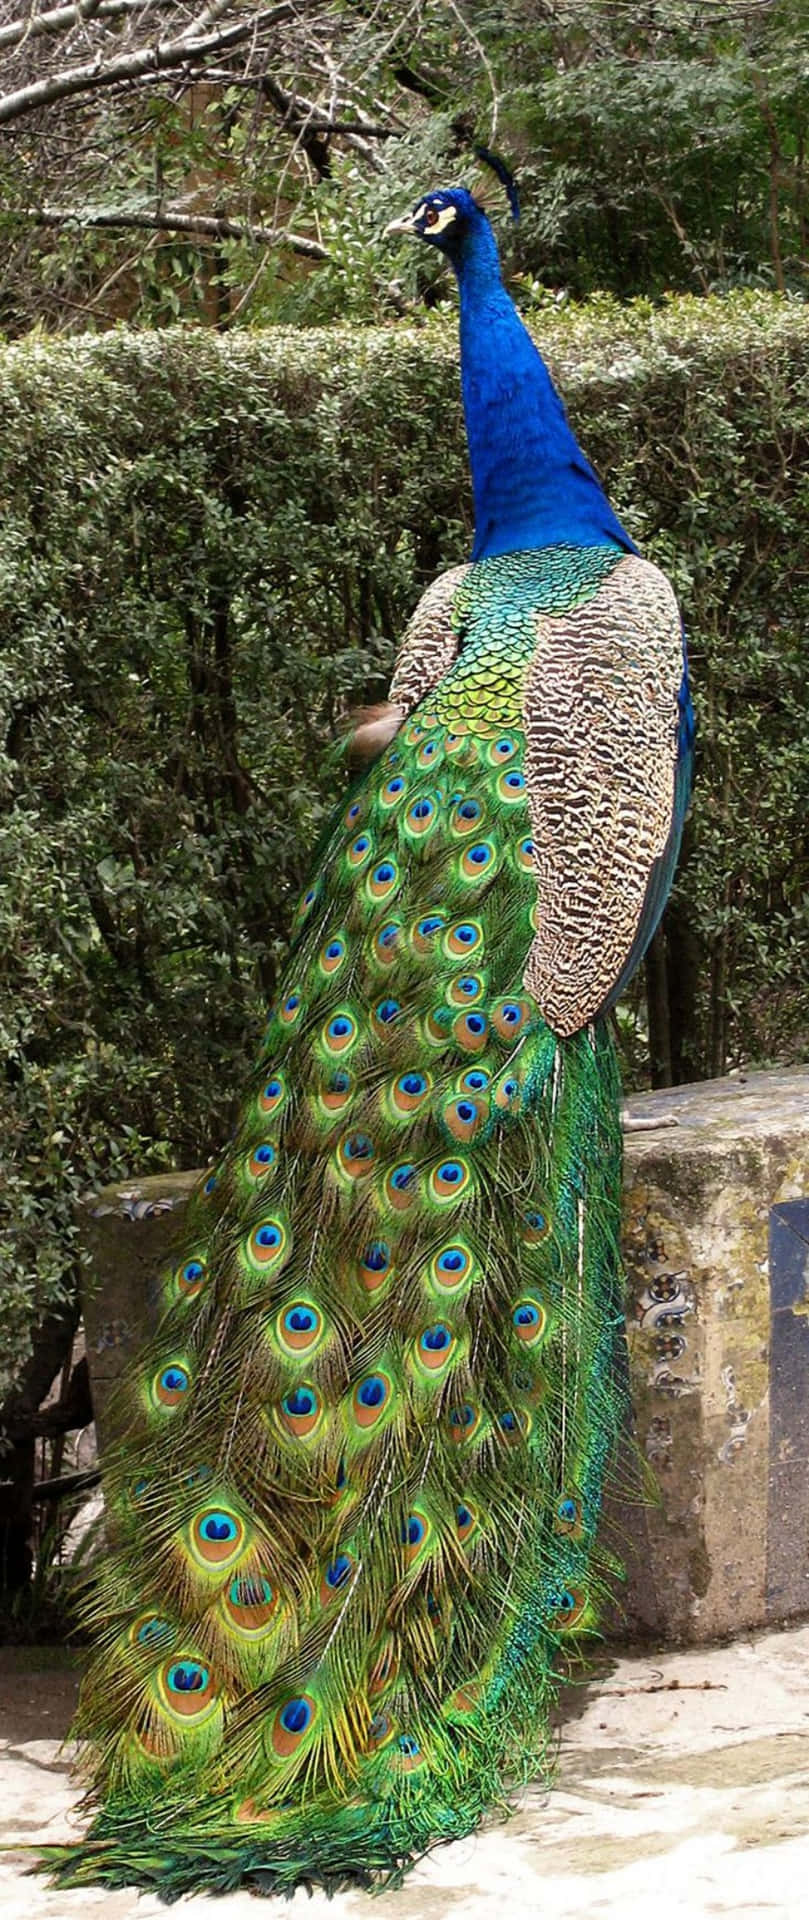 A Peacock With Its Tail Out